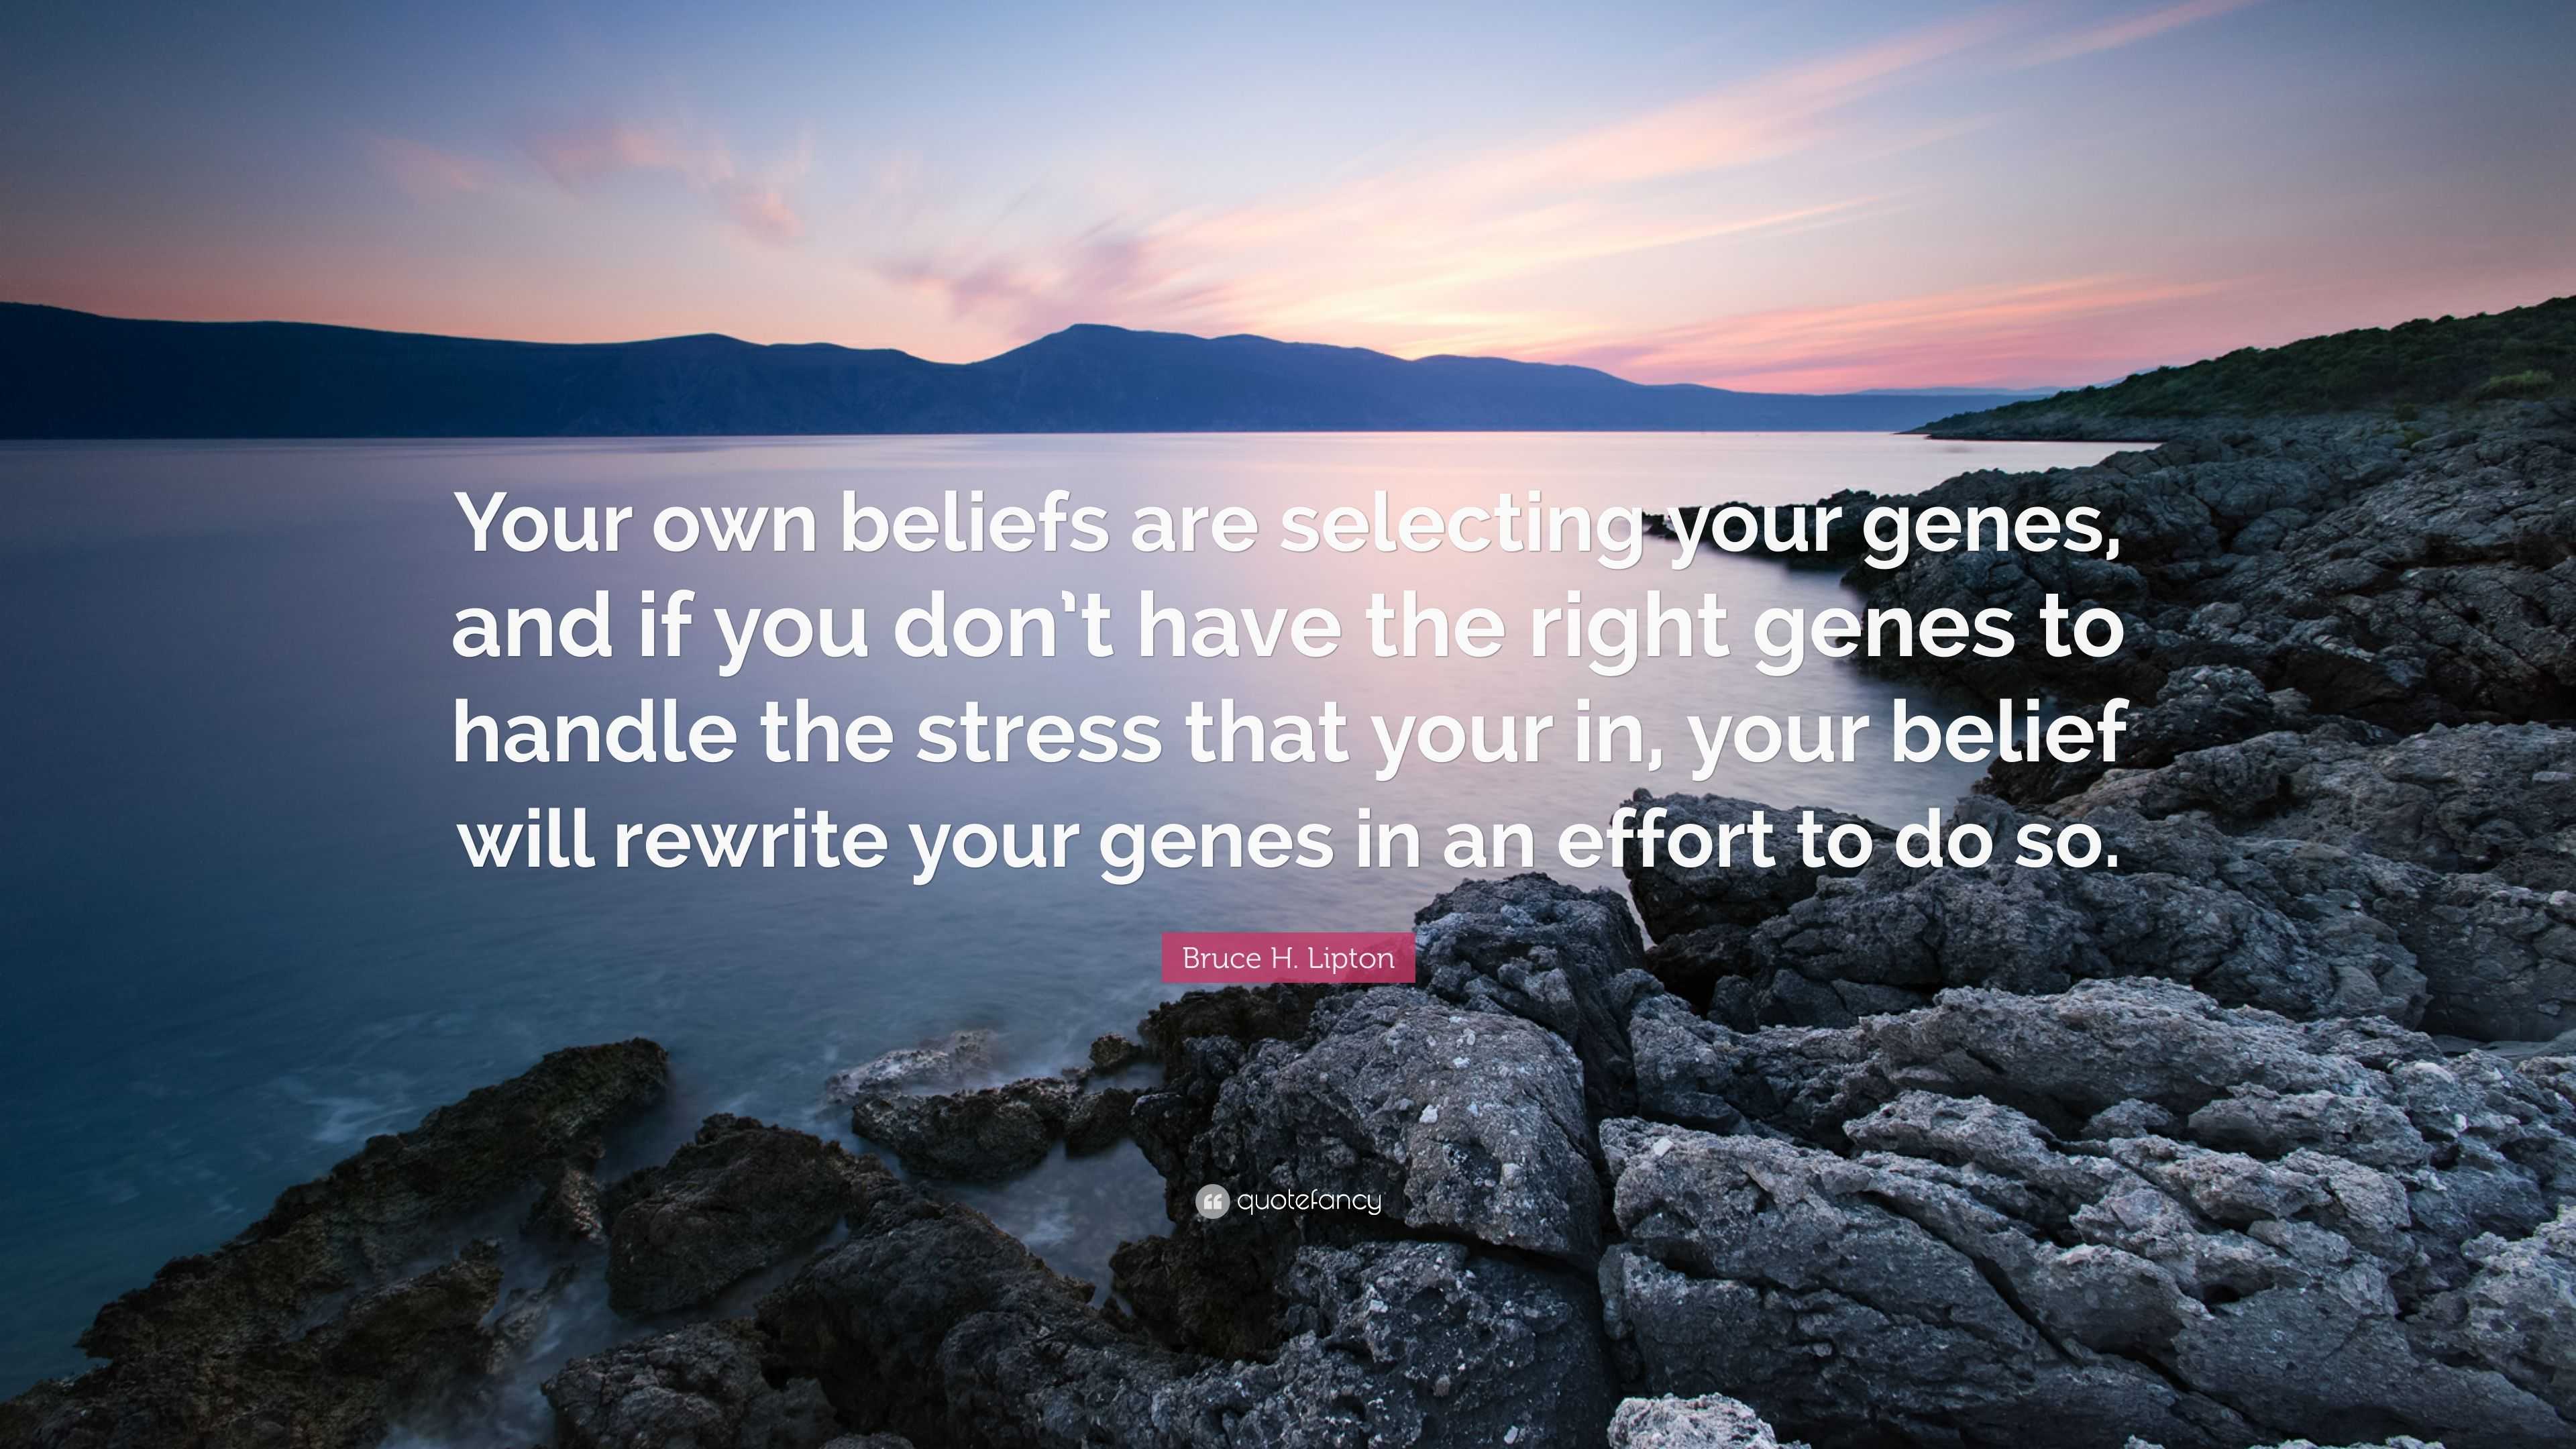 Bruce H. Lipton Quote: "Your own beliefs are selecting your genes, and if you don't have the ...